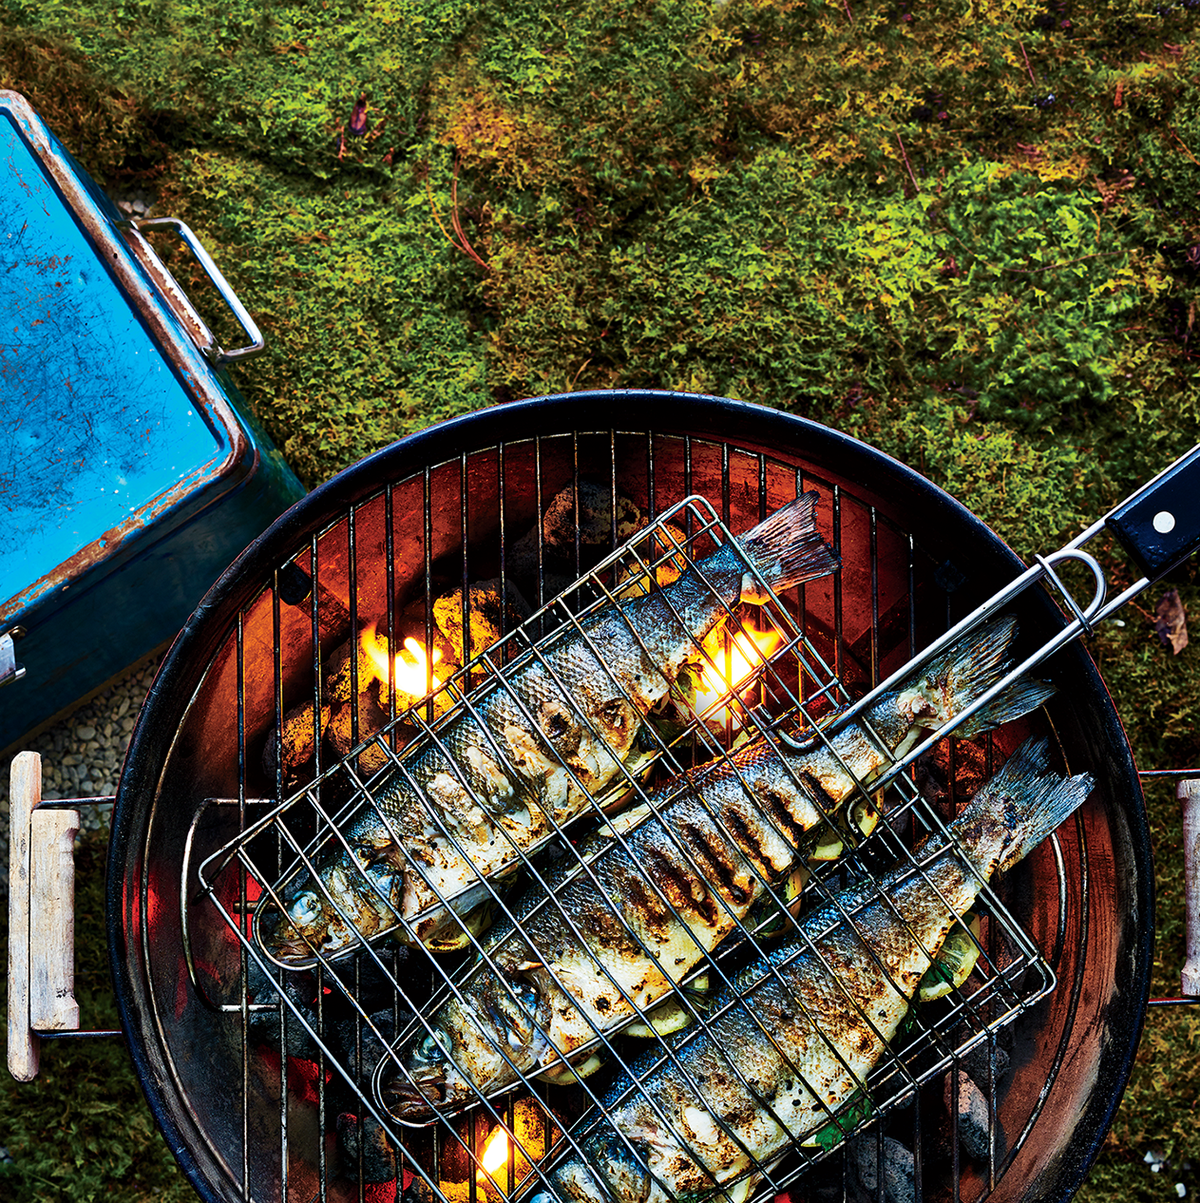 Grill Basket and Rack - Perfect for Grilling Fish and More